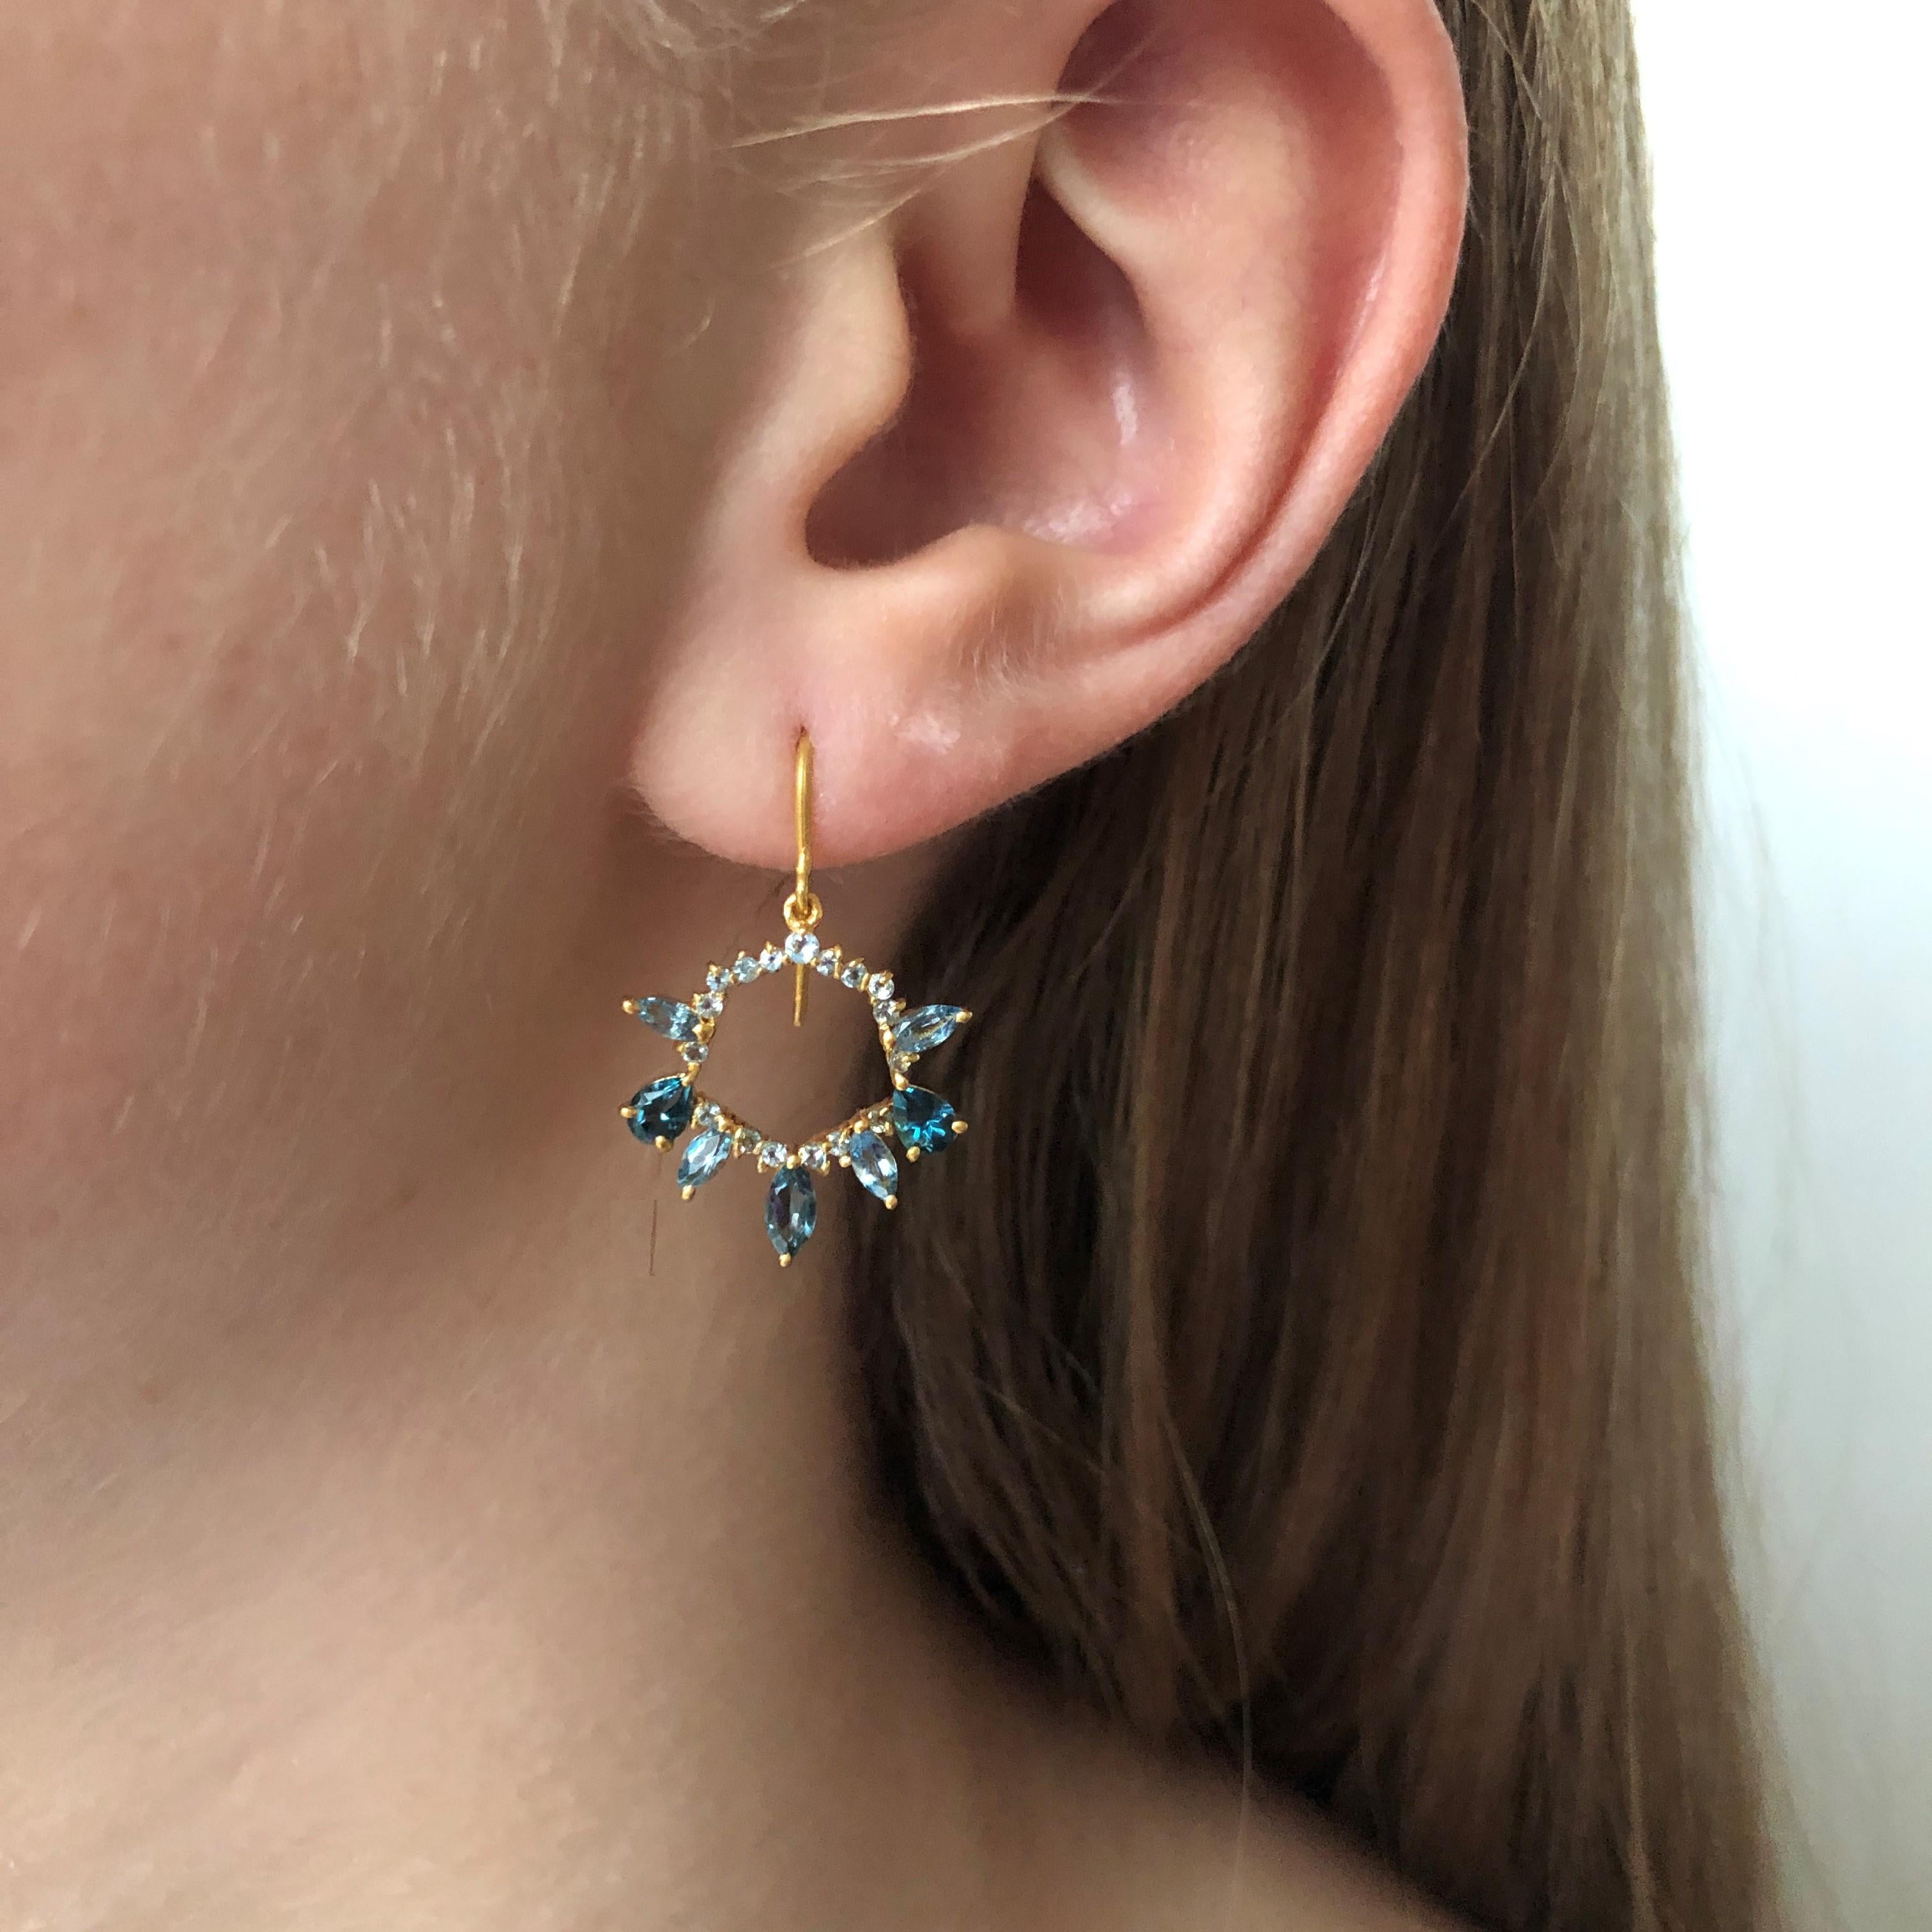 Designed by award winning Jewelry Designer, Lauren Harper, these 18kt Solid Gold hand made earrings feature faceted 1.74cts of Aquamarine and London Blue Topaz set in an intricate open Hexagon shaped setting. Lightweight enough for all day wear yet